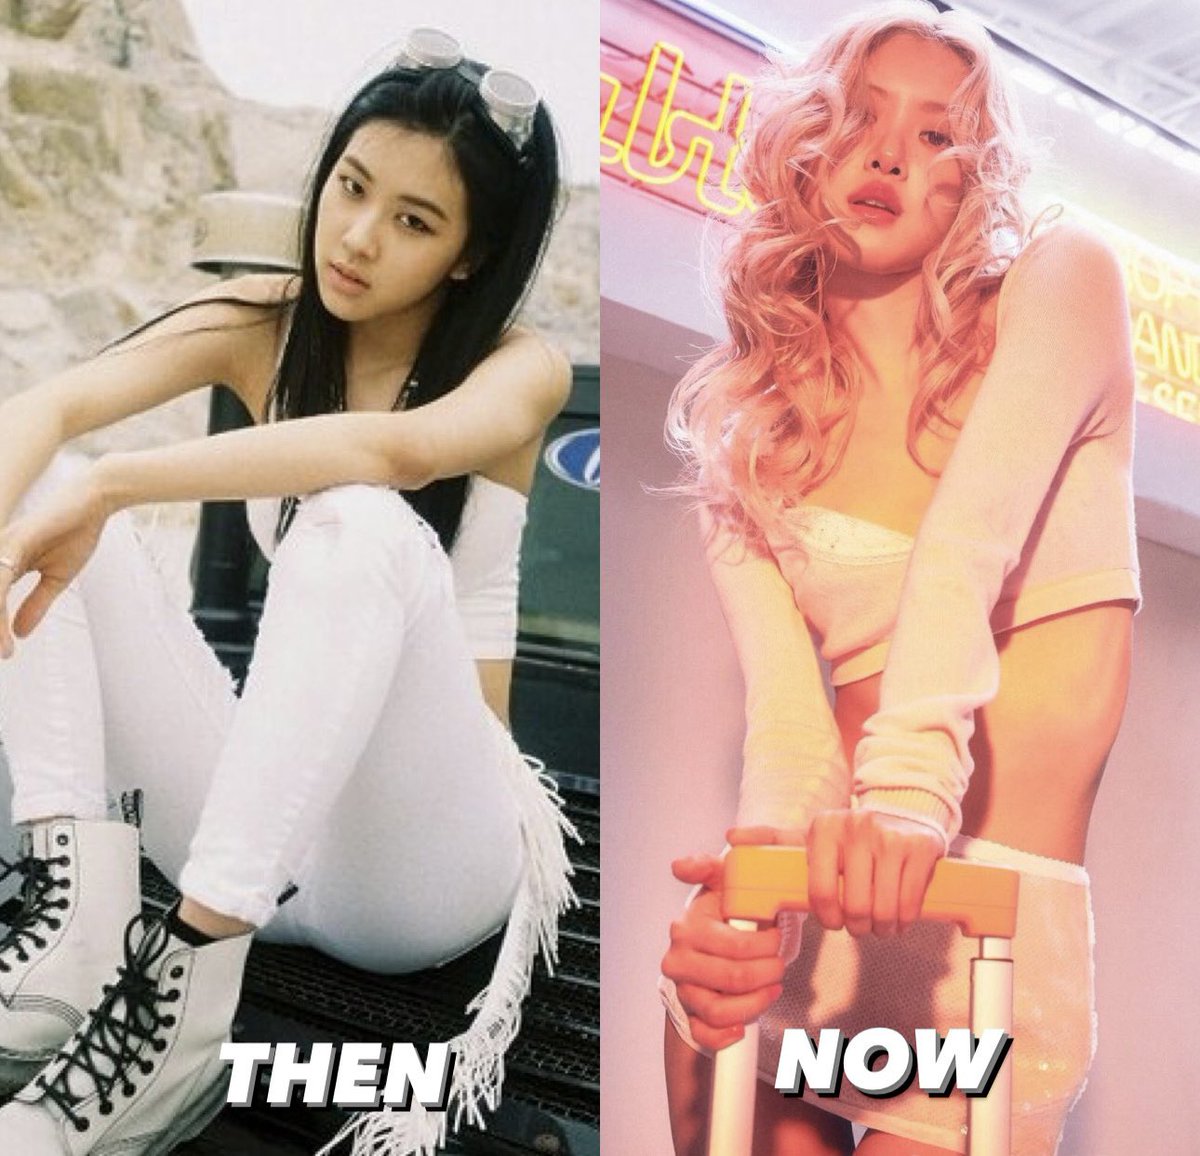 On this day, #ROSÉ started her journey as a YG Entertainment (@ygent_official) trainee, and made her long awaited debut as @BLACKPINK. 

#TwelveYearsWithROSÉ  #로제 #블랙핑크